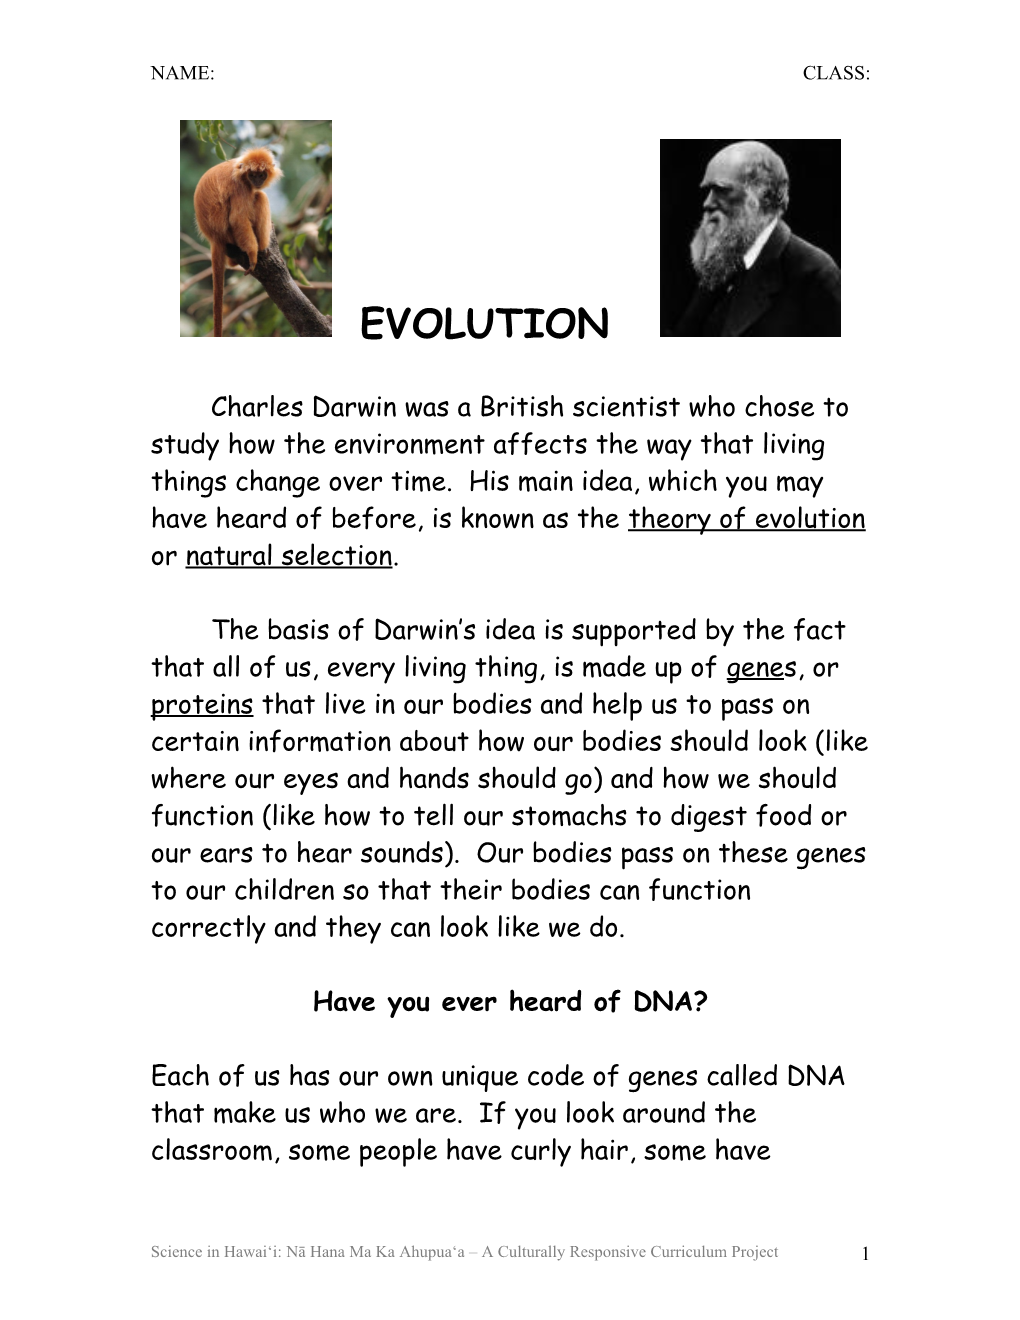 Charles Darwin Was a British Scientist Who Chose to Study How the Environment Affects The